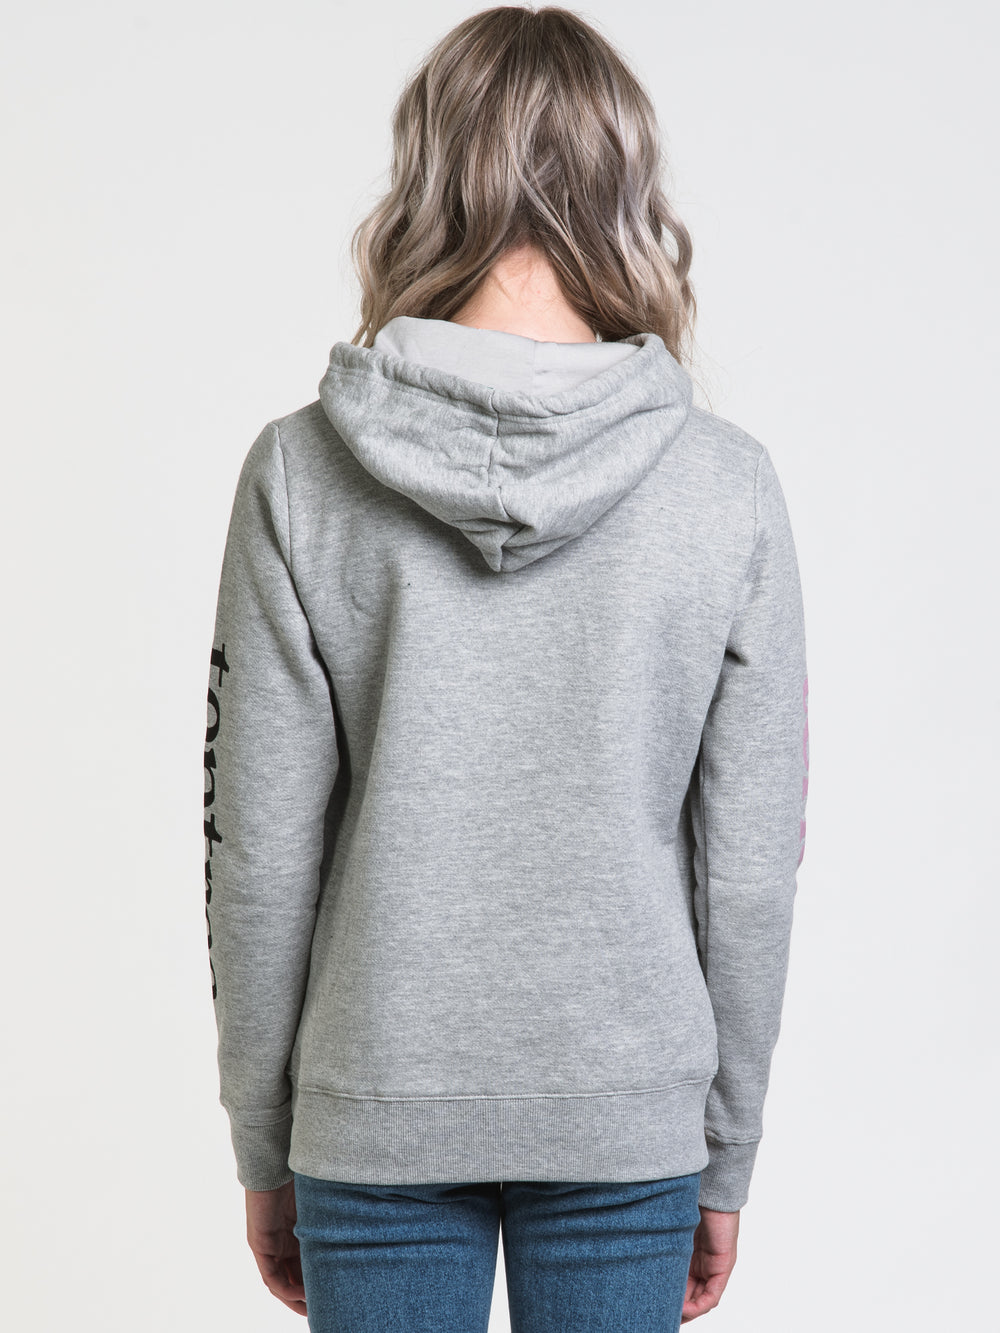 TENTREE ARC SLEEVE LEFT CHEST PRINT HOODIE - CLEARANCE